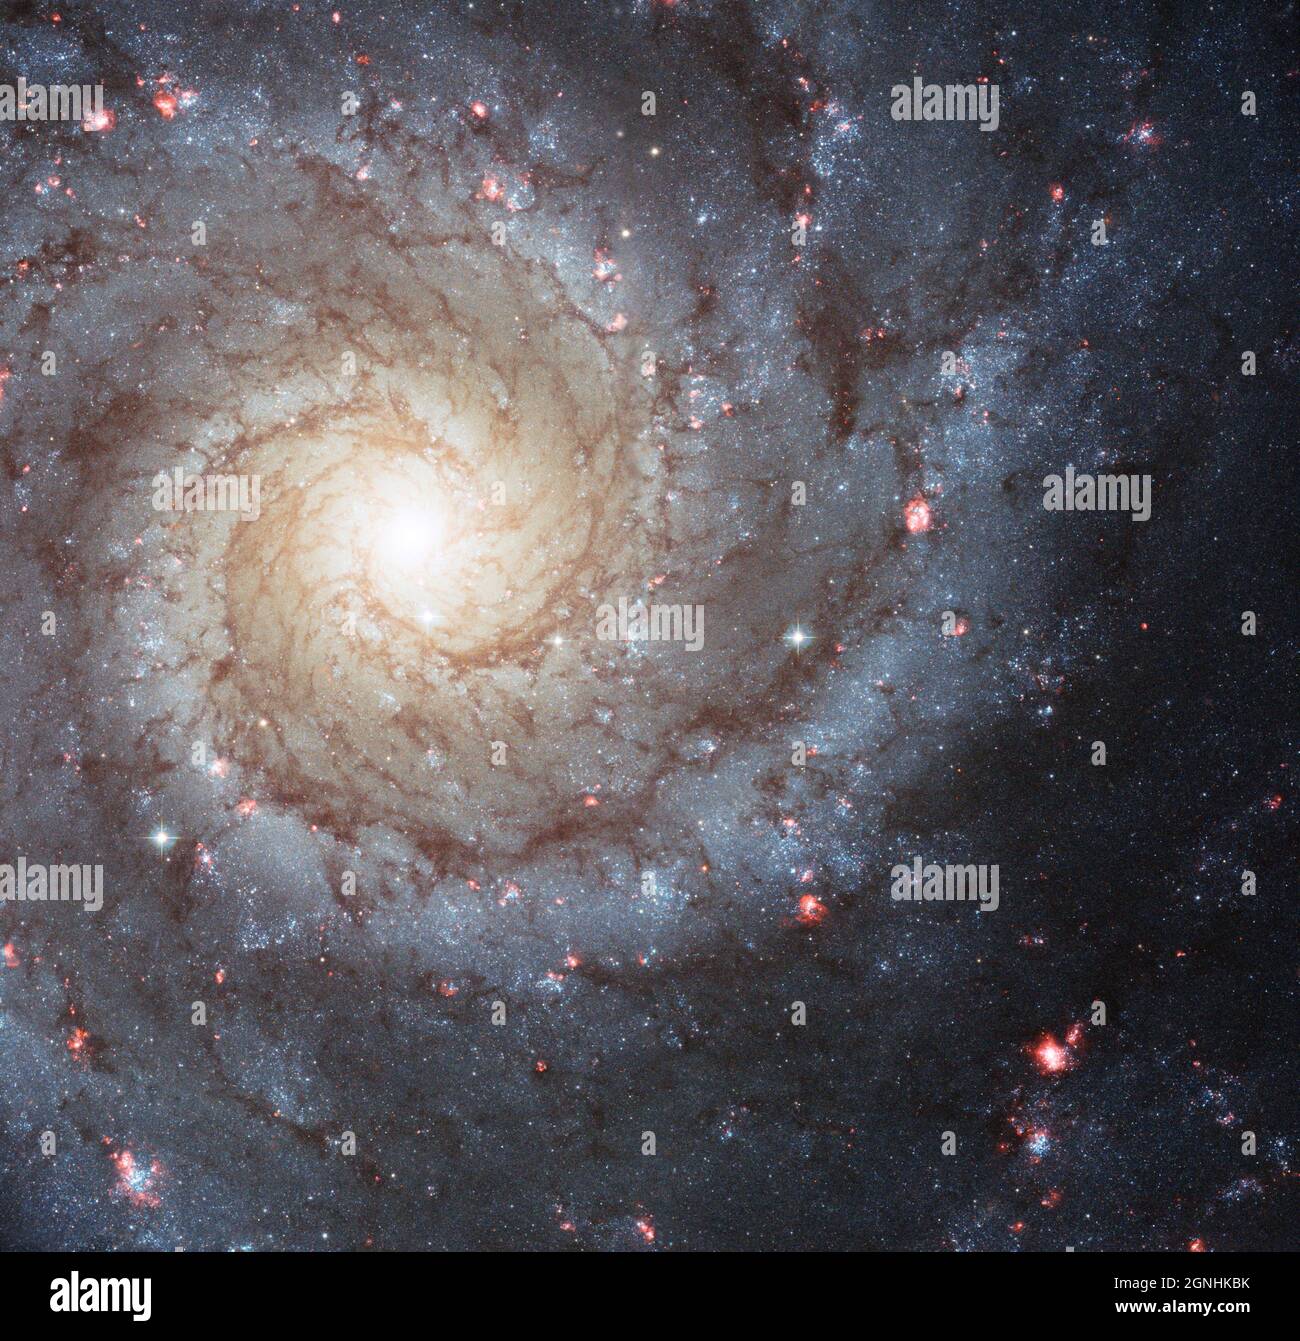 Messier 74, also called NGC 628, is a stunning example of a "grand-design" spiral galaxy that is viewed by Earth observers nearly face-on. Its perfectly symmetrical spiral arms emanate from the central nucleus and are dotted with clusters of young blue stars and glowing pink regions of ionized hydrogen . Image source NASA/ESA Hubble Space Telescope Stock Photo